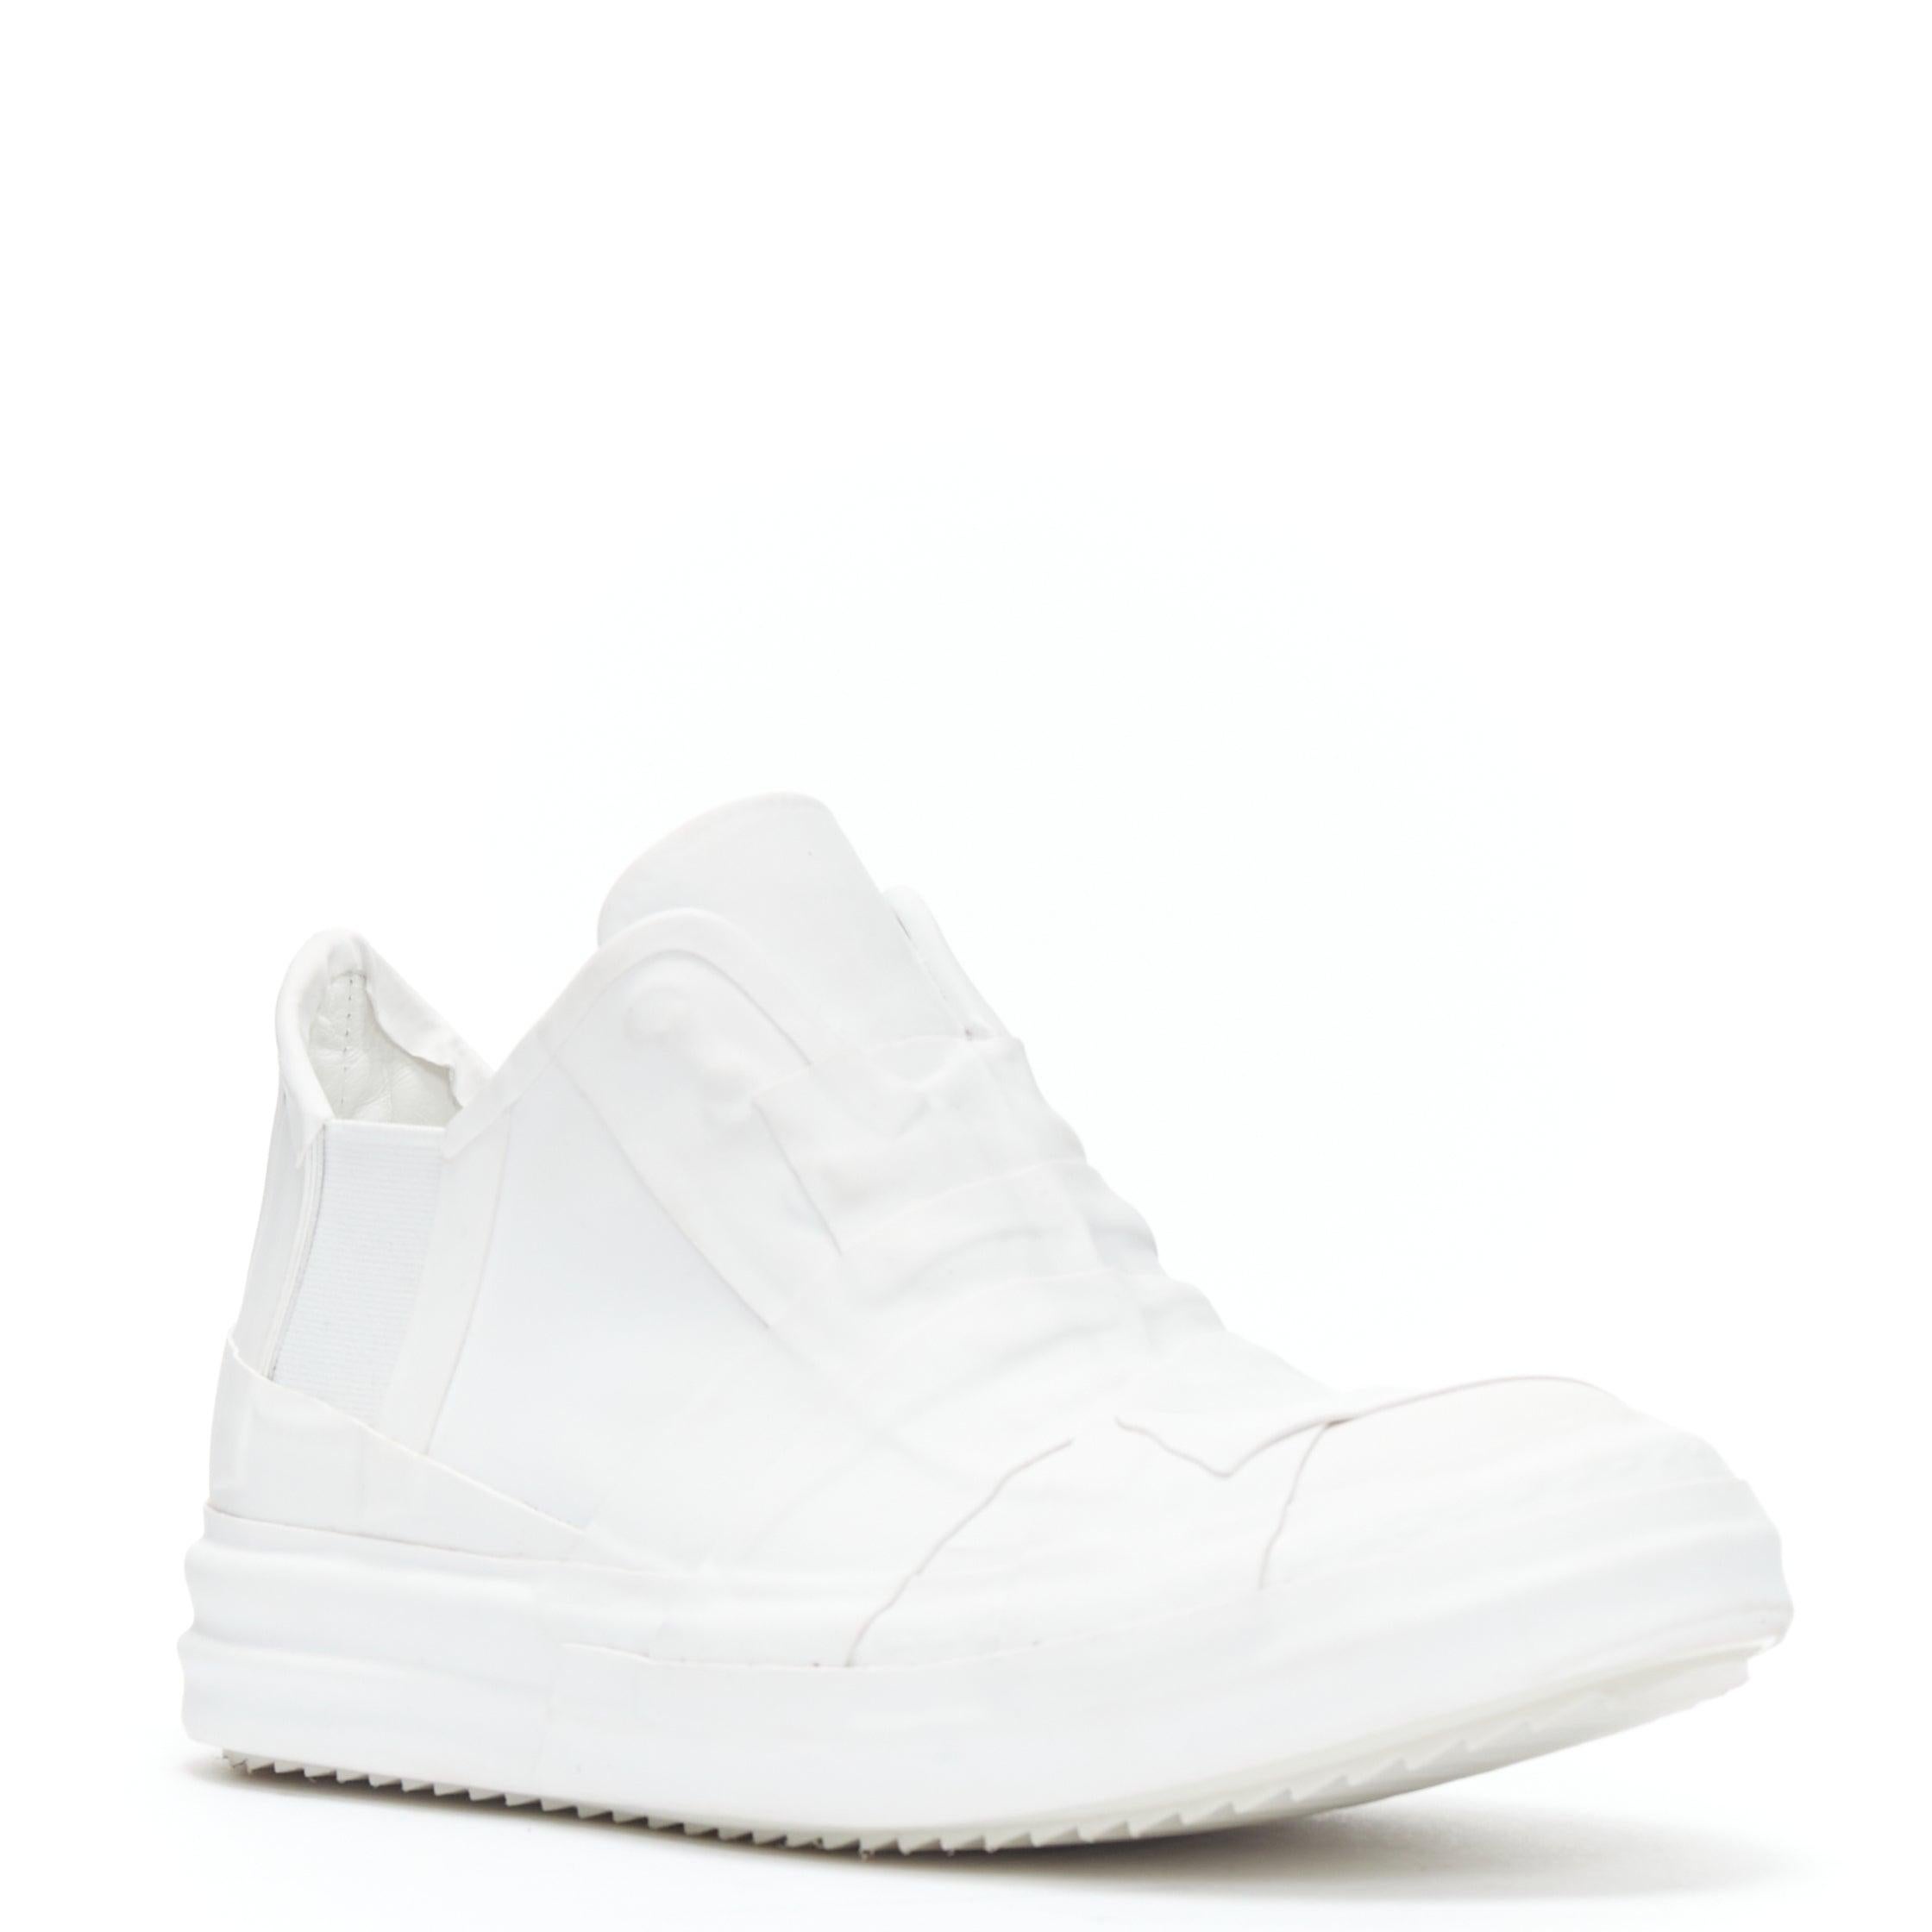 new RICK OWENS Geobasket Mummy Plaster wrapped white mid top sneaker EU36
Reference: TGAS/B01336
Brand: Rick Owens
Designer: Rick Owens
Model: White Plastered Geobasket
Material: Rubber
Color: White
Pattern: Solid
Closure: Stretchy
Extra Details: